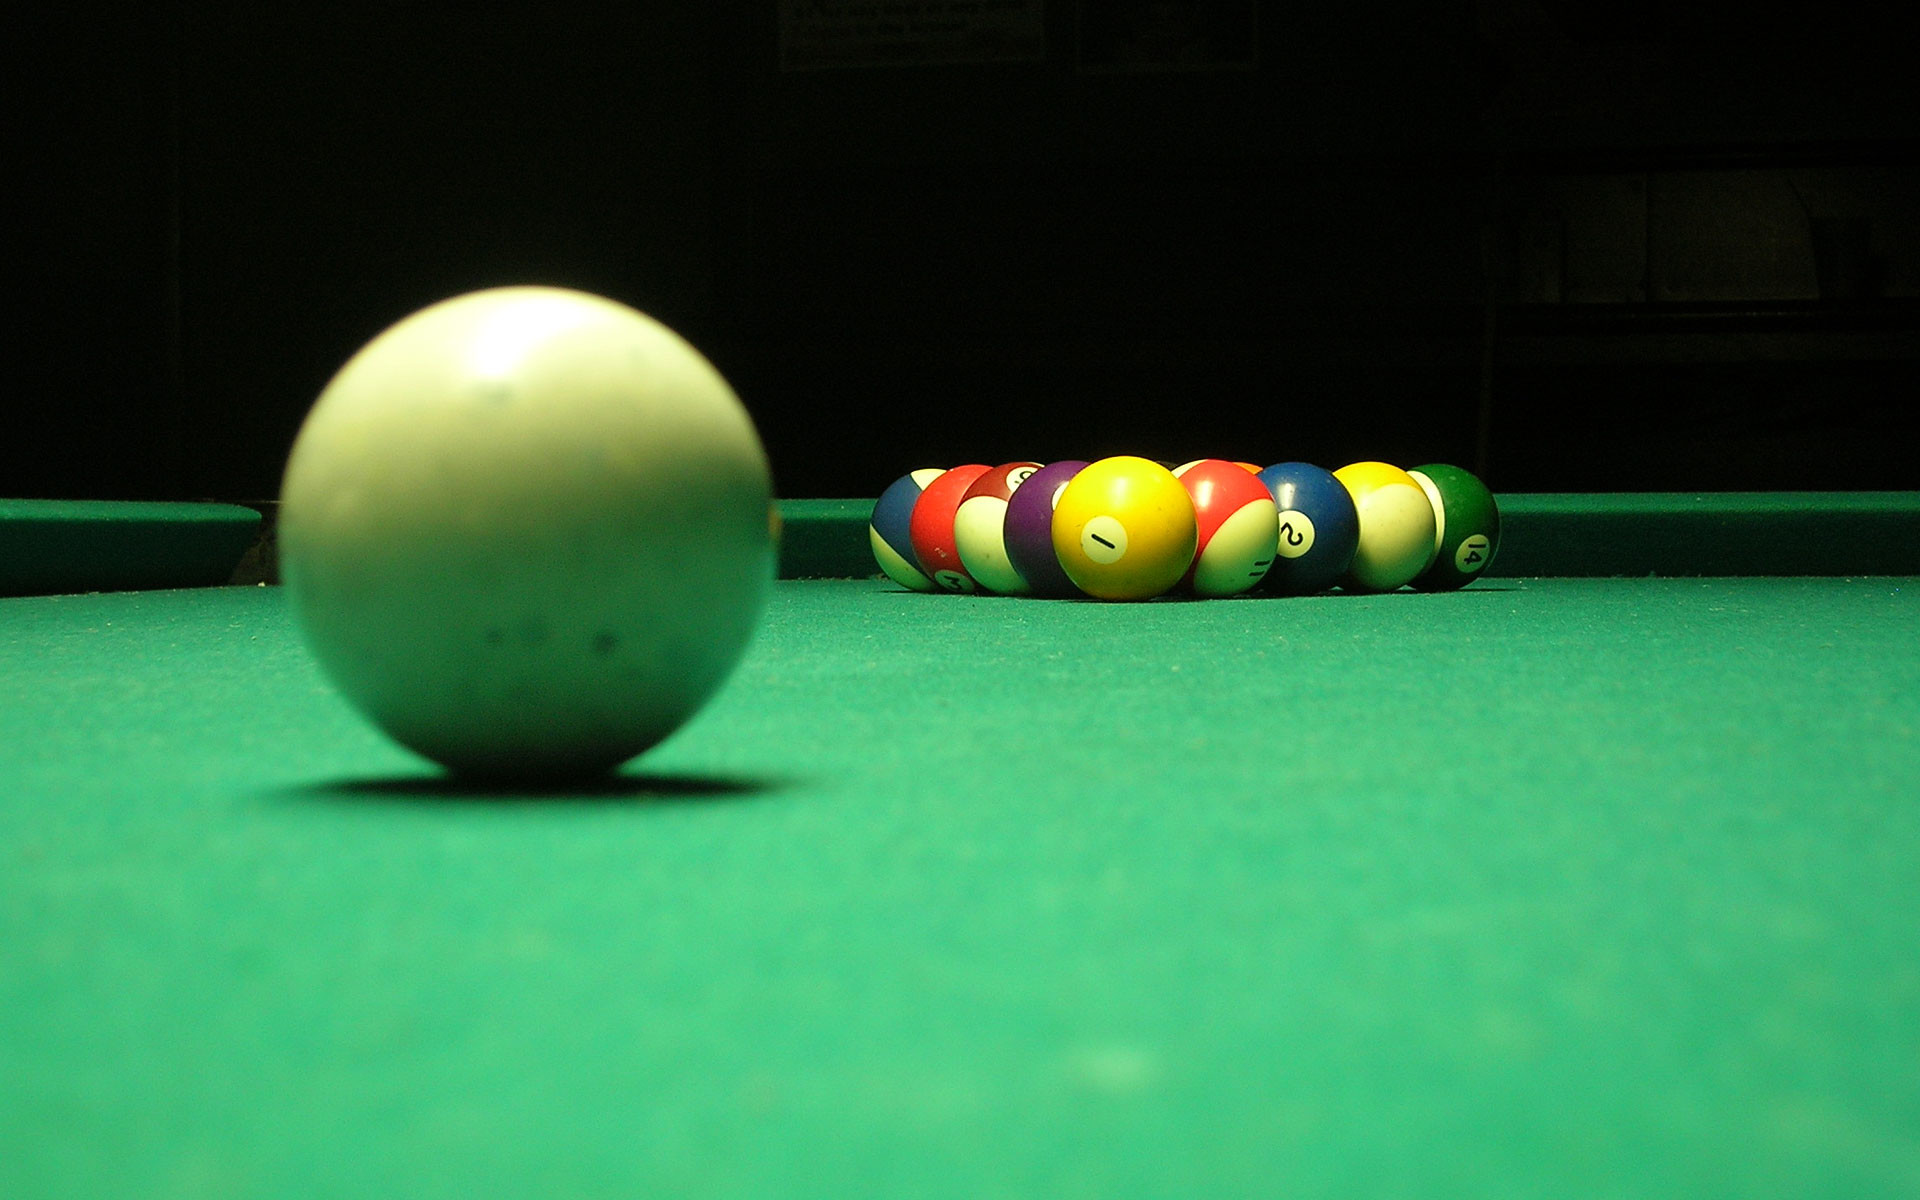 1920x1200 Download the following Billiards 13472 image by clicking the orange button  positioned underneath the "Download Wallpaper" section.